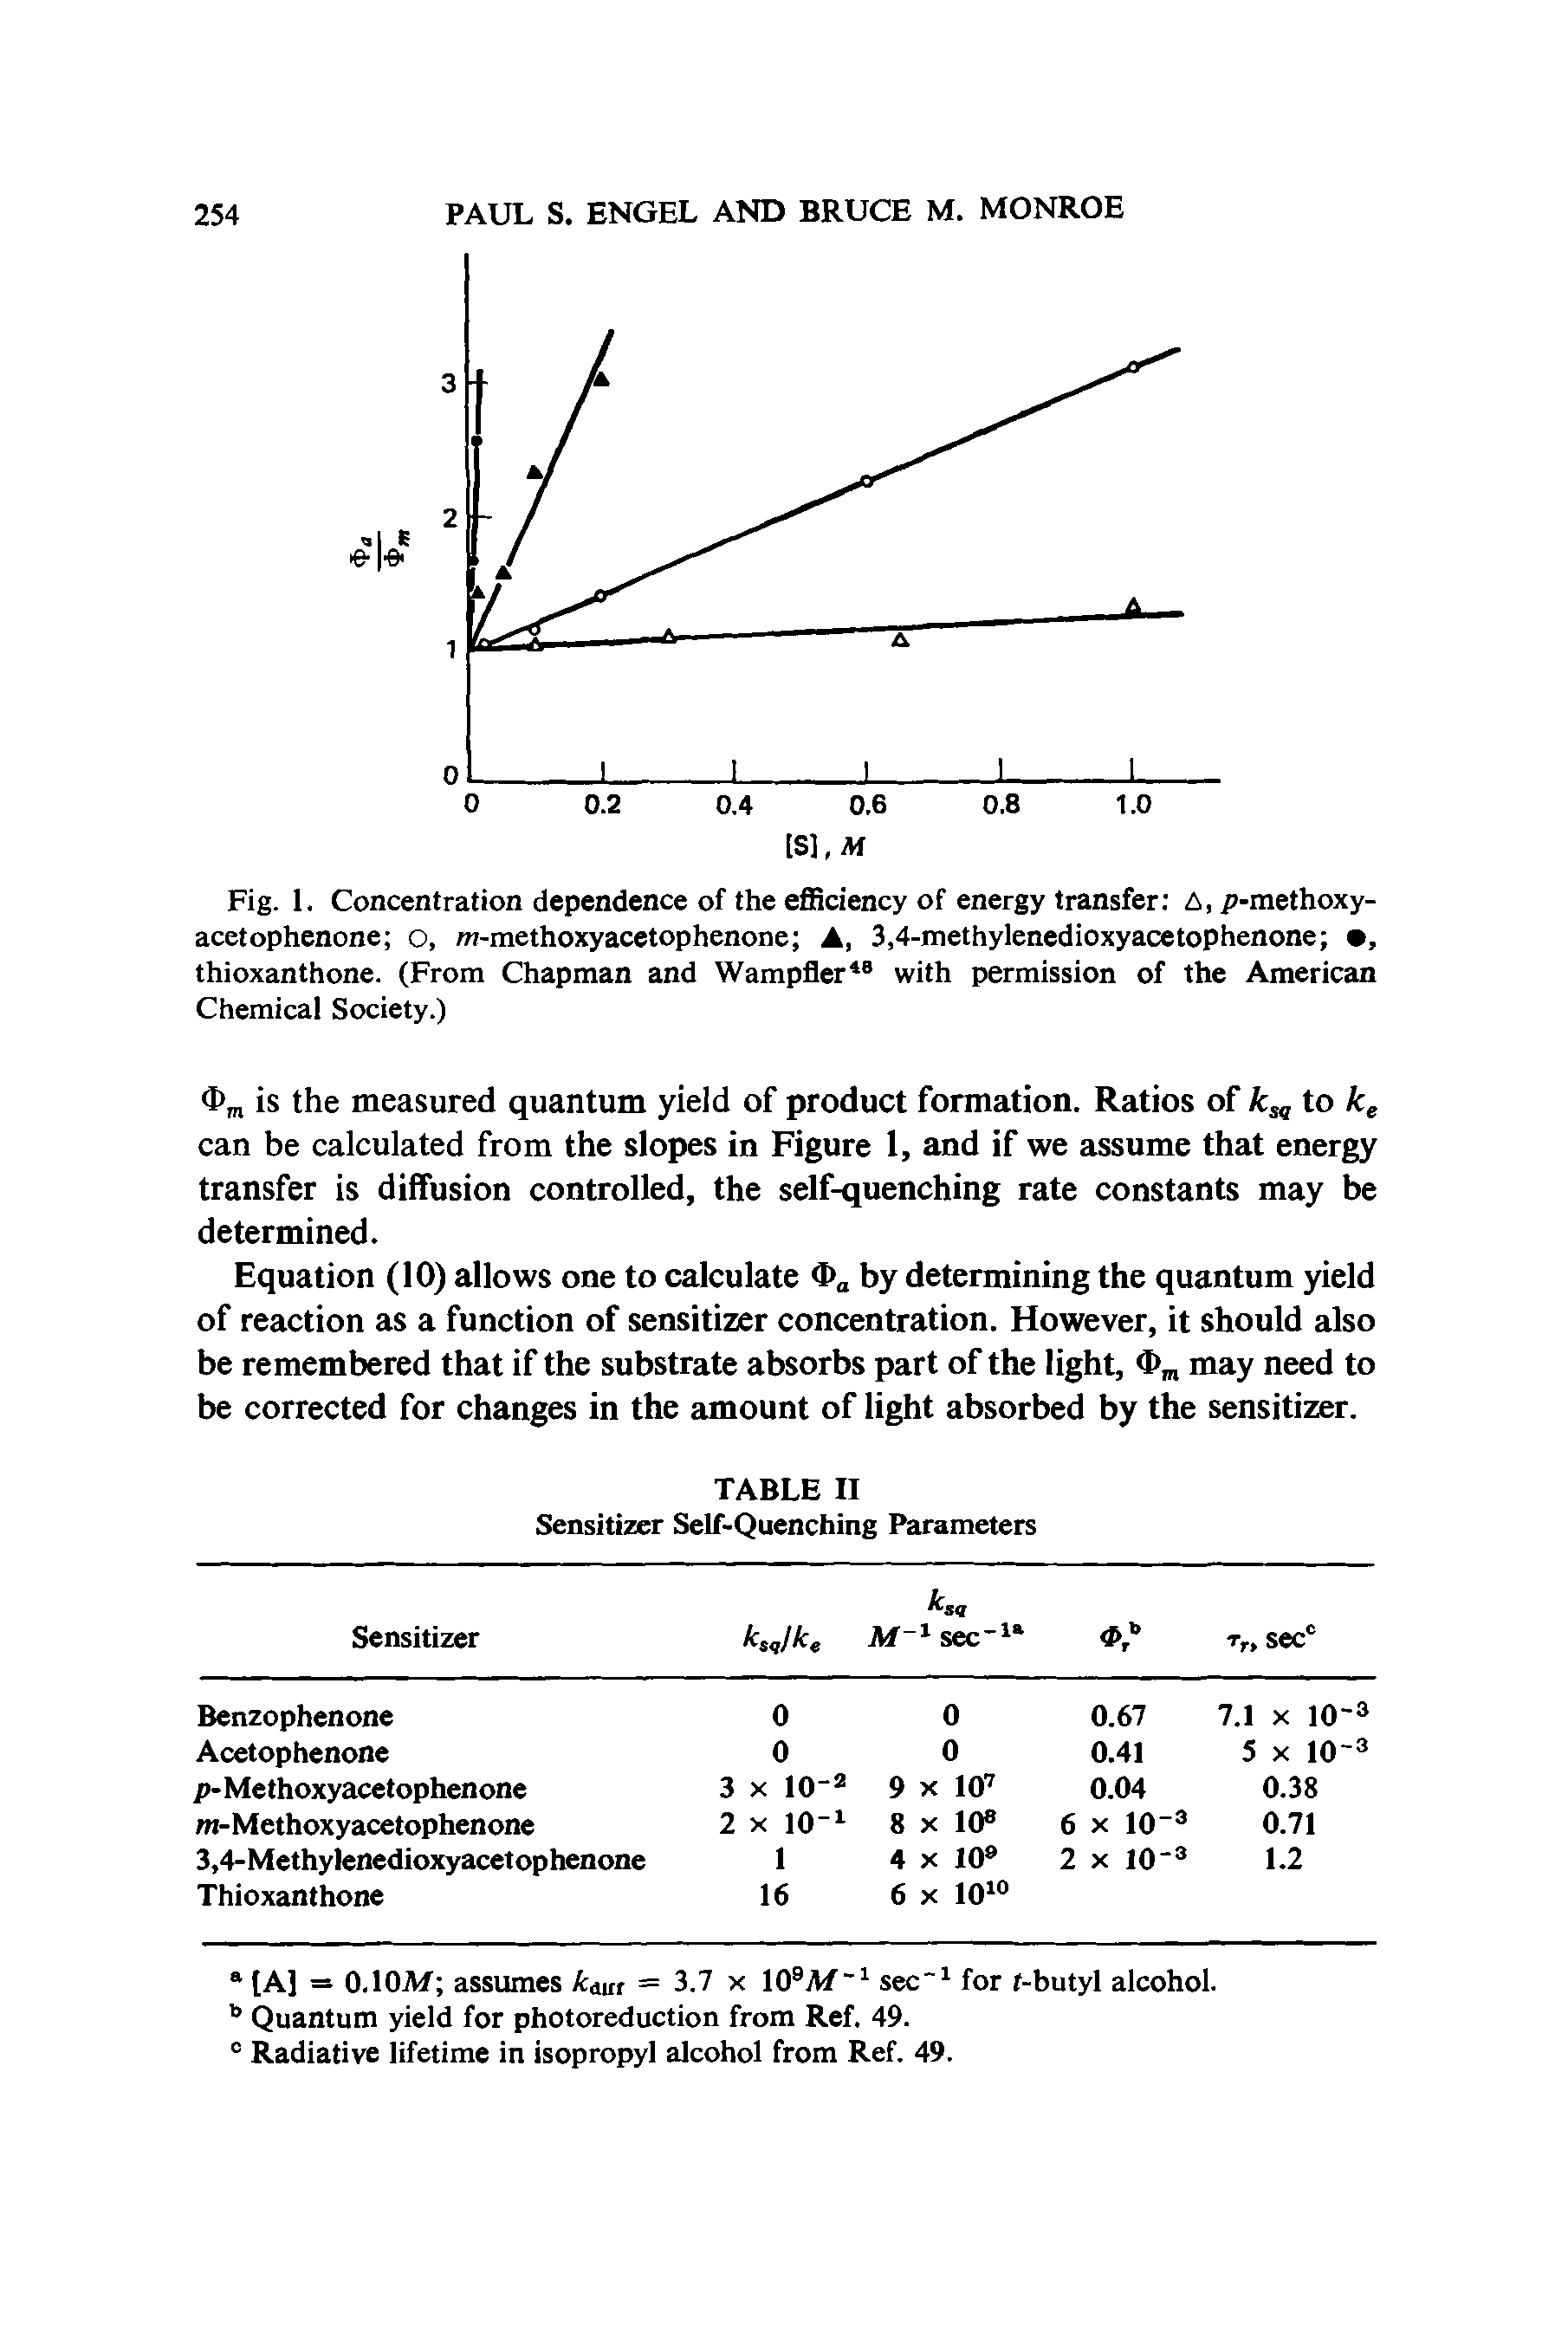 Fig. 1. Concentration dependence of the efficiency of energy transfer A, p-methoxy-acetophenone o, m-methoxyacetophenone A, 3,4-methylenedioxyacetophenone , thioxanthone. (From Chapman and Wampfler48 with permission of the American Chemical Society.)...